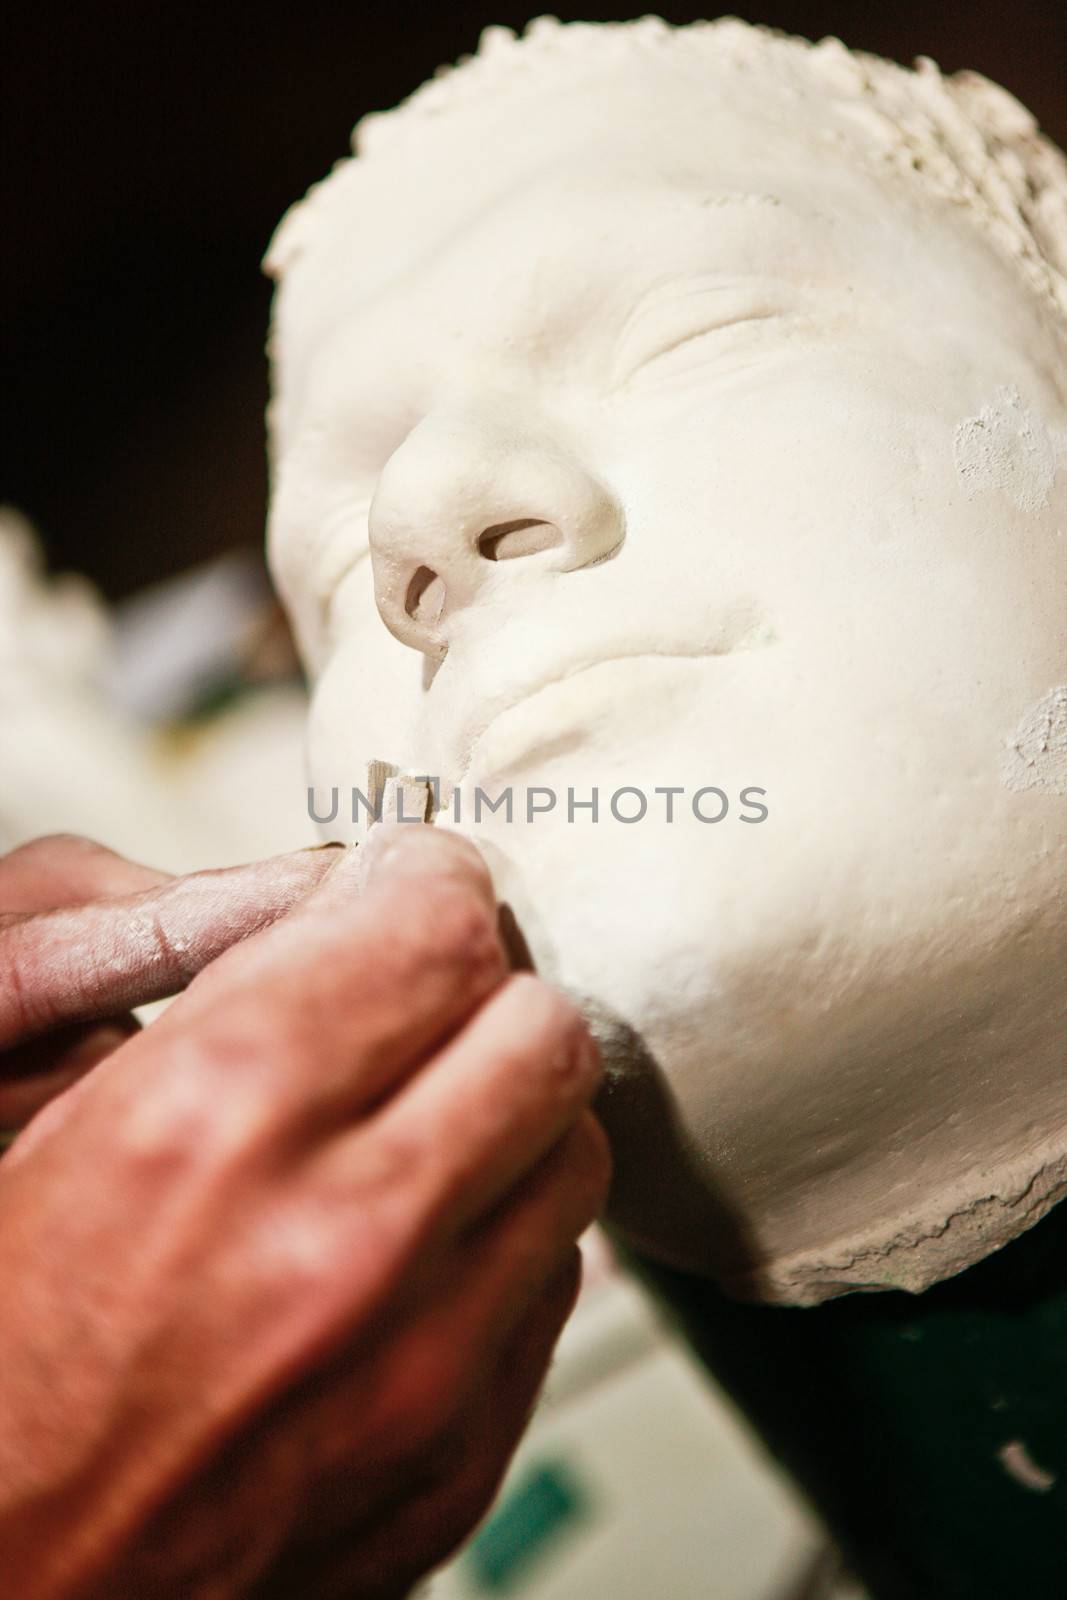 Artist sculpting a realistic male human face from clay, closeup view of the artists hands